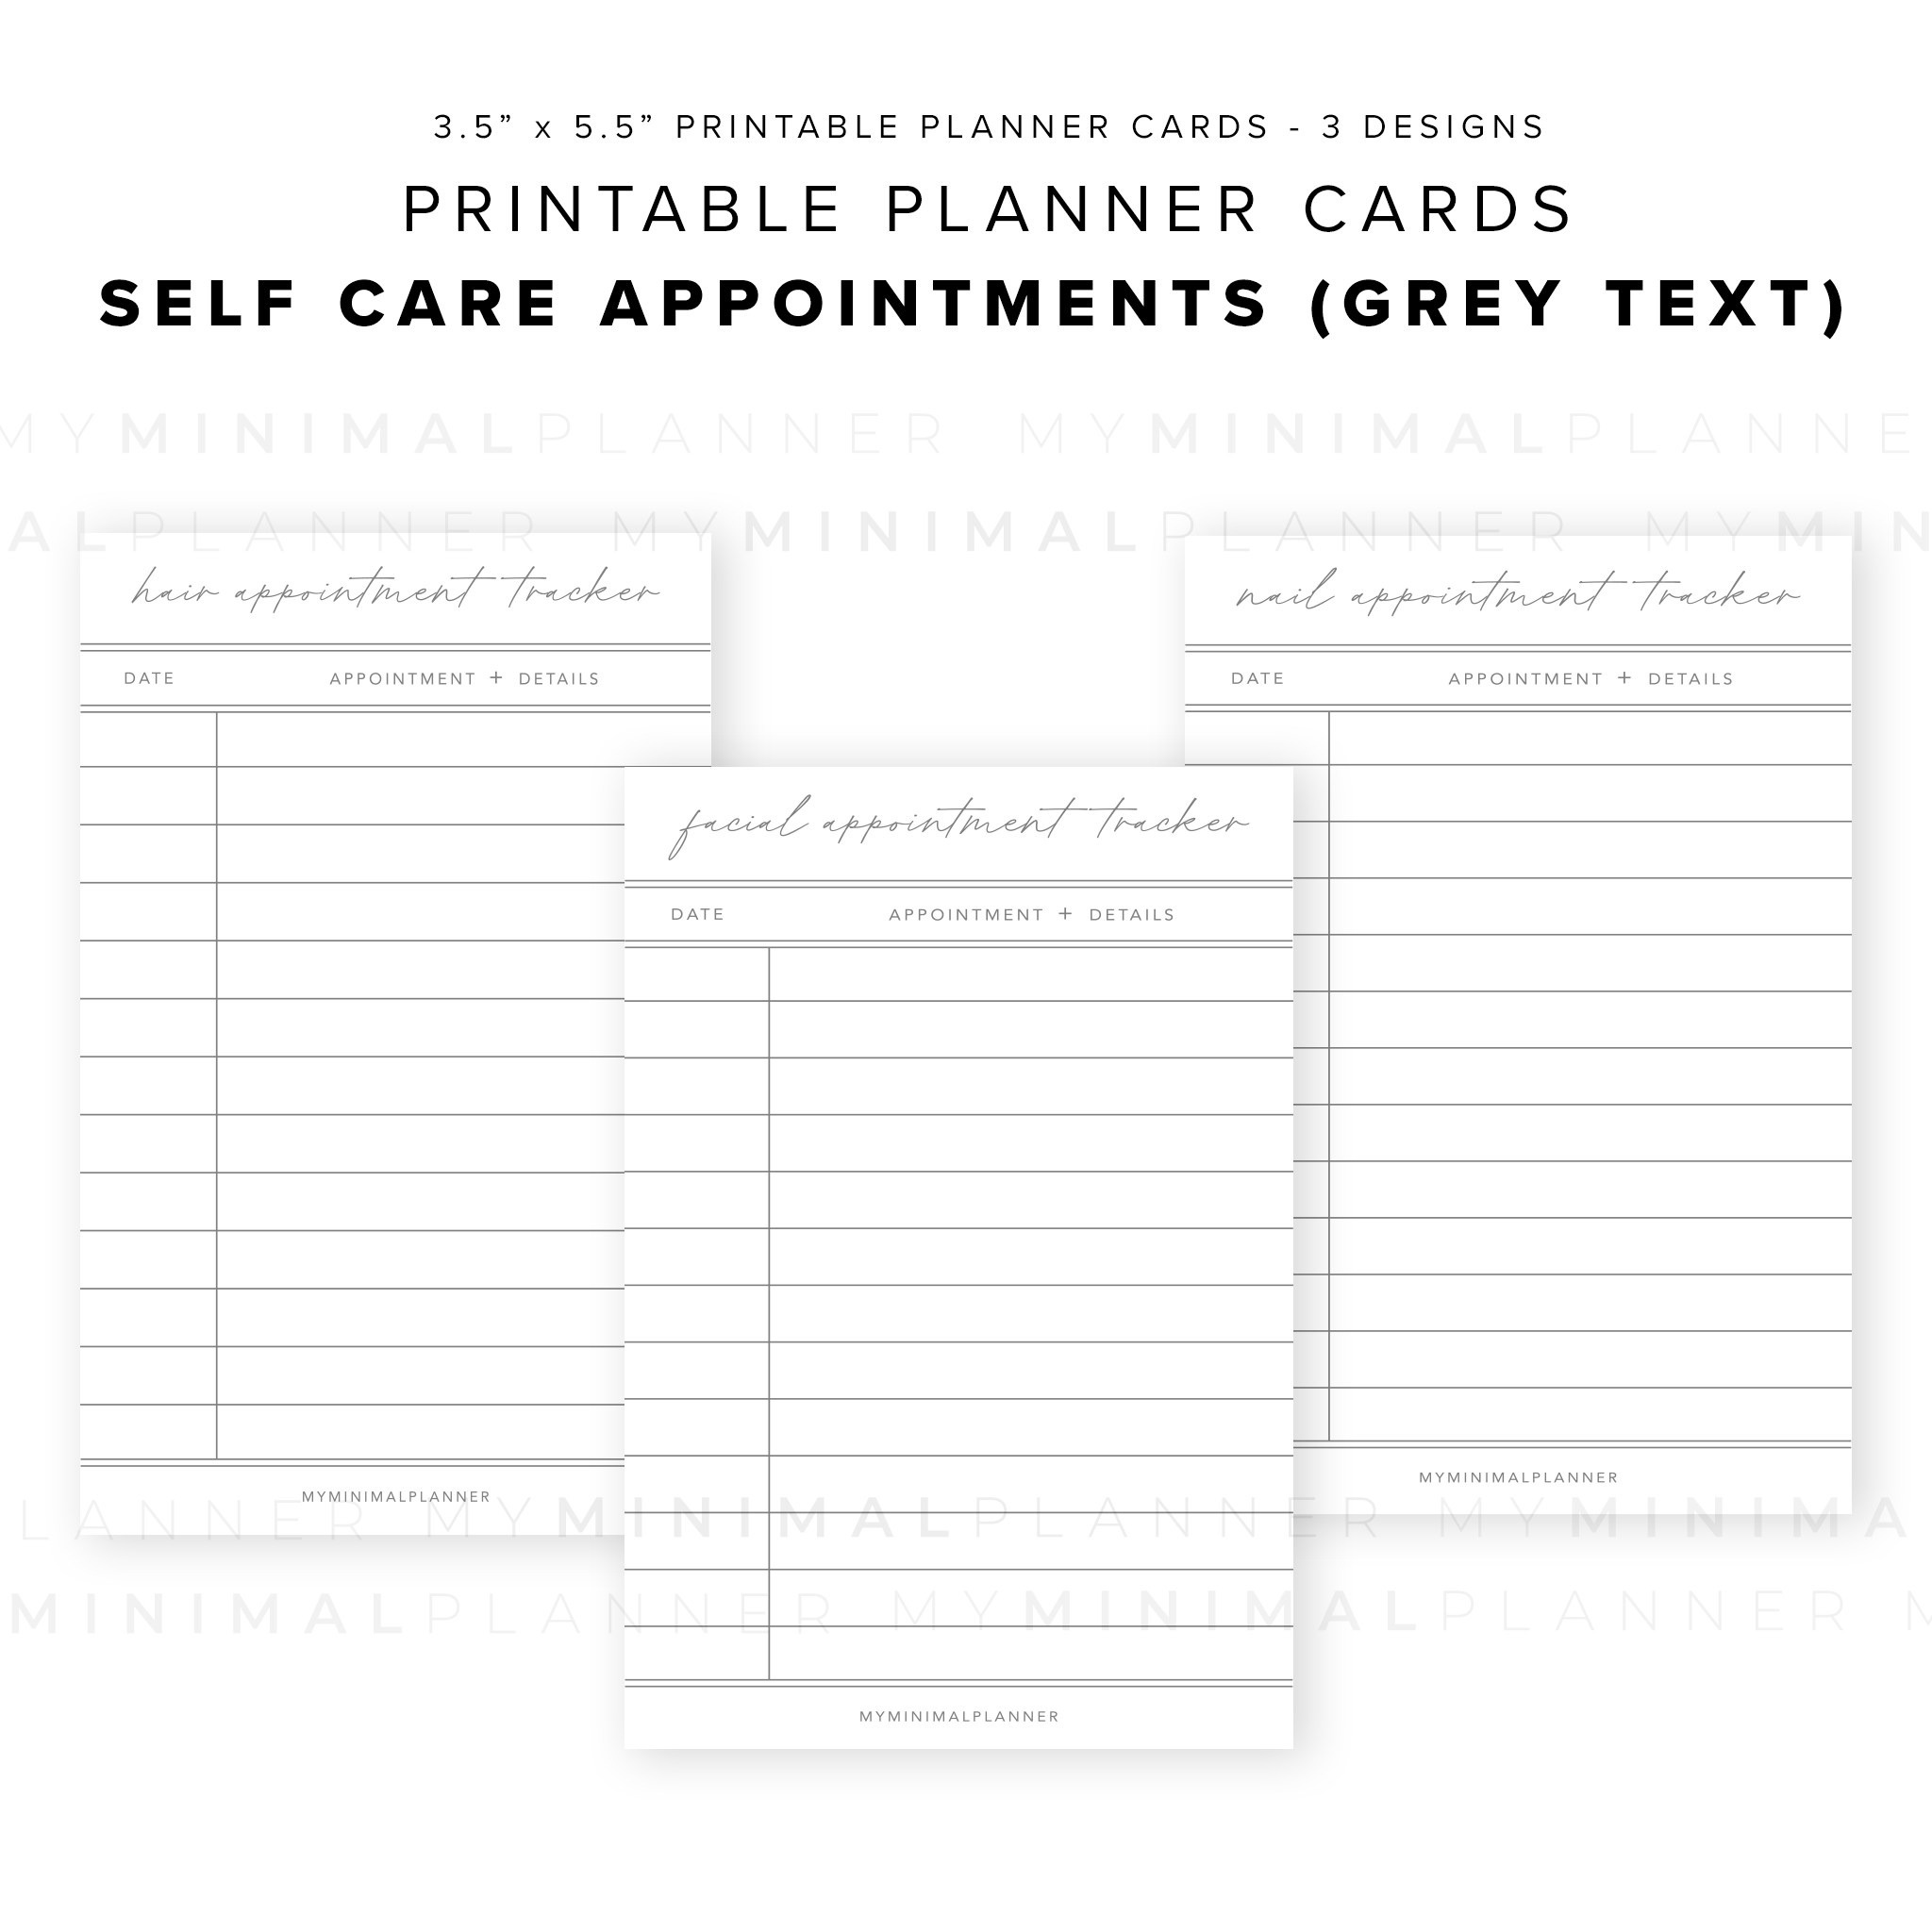 PPC20 - Self Care Appointments - Printable Planner Cards